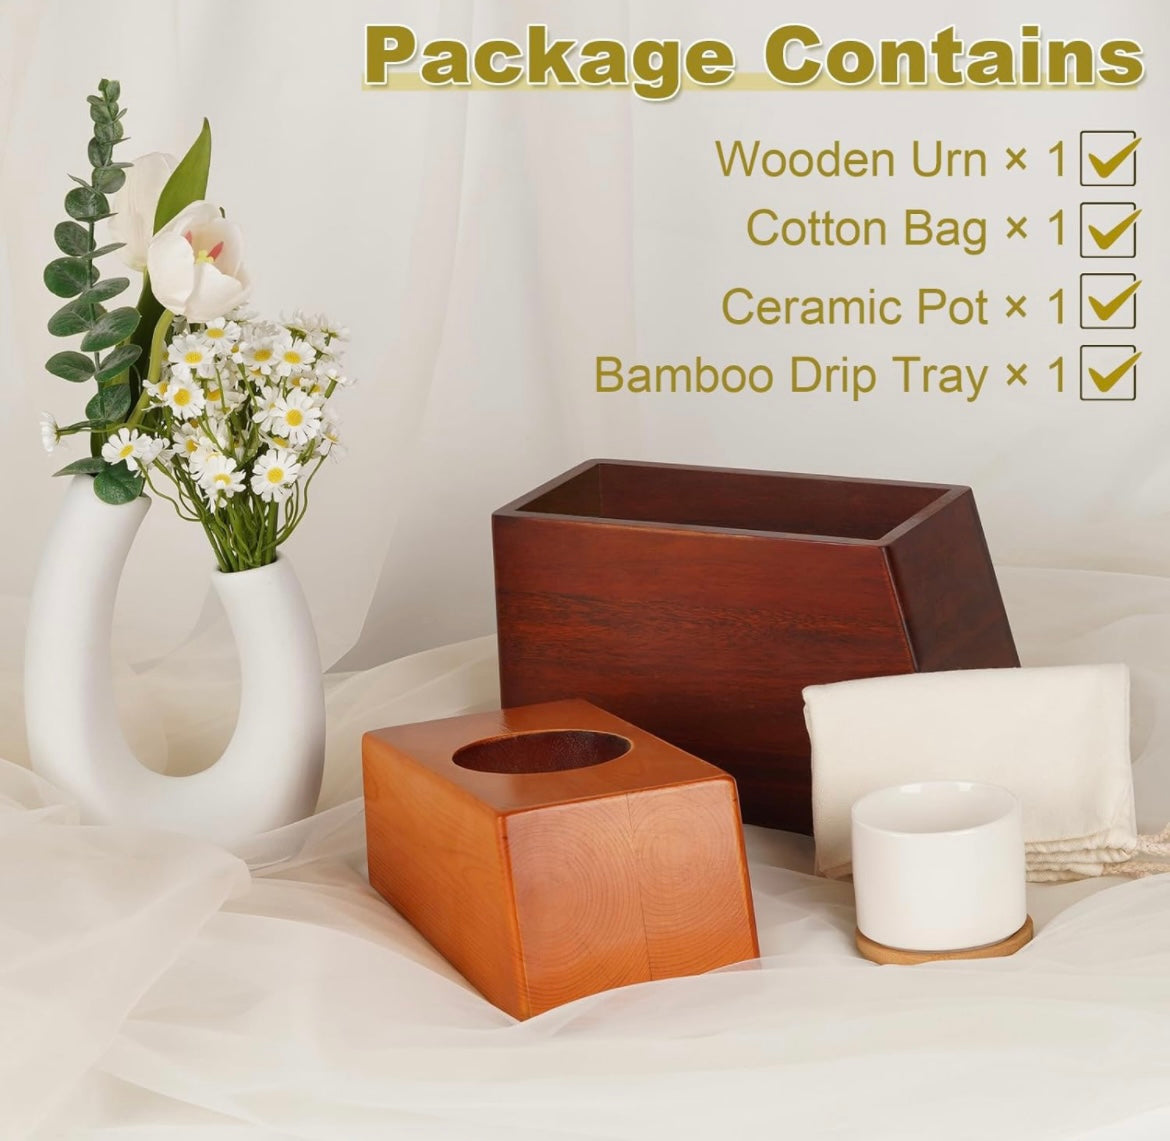 Decorative Urns Earns for Ashes Handmade Solid Wooden Urn for Ashes for Men Memorial Magnetic Funeral Cremation Urn Human Ashes Adult Female with Ceramic Pot and Cotton Bag